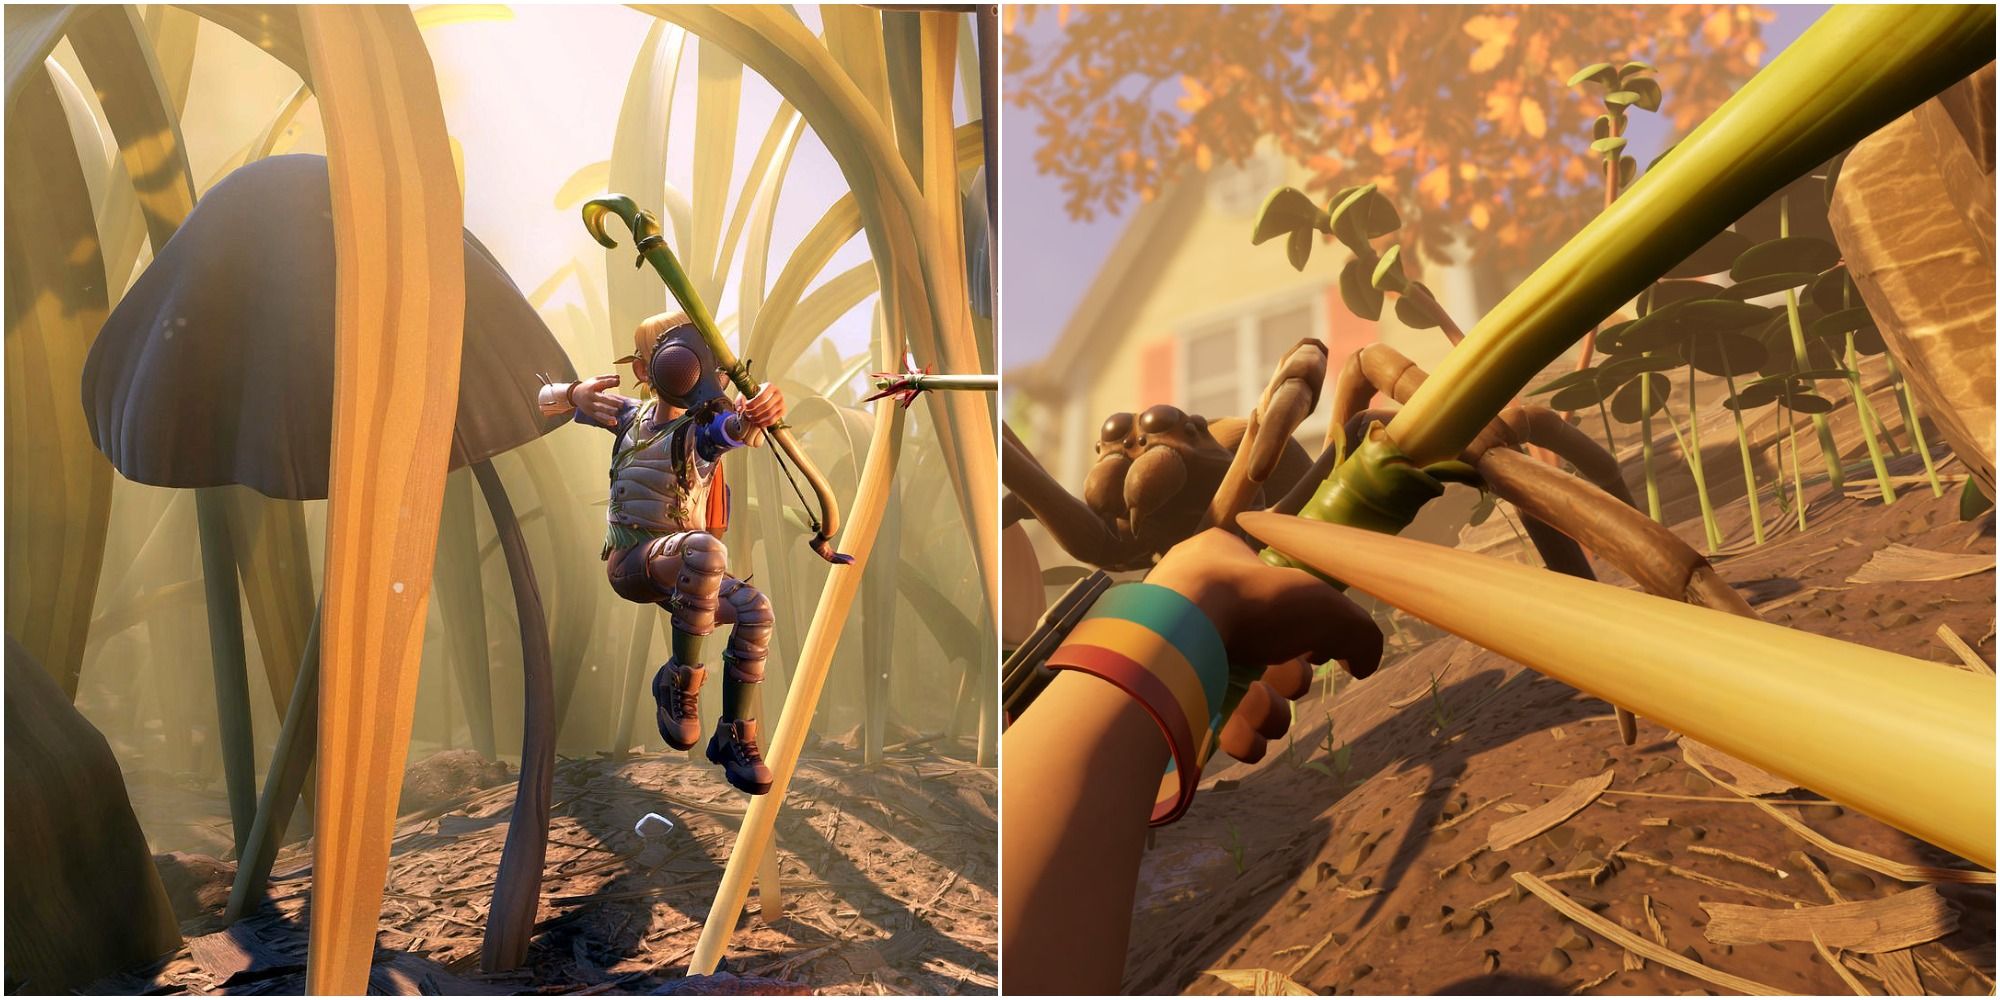 The Grounded characters firing their bow while jumping on the left and aiming at a spider on the right.